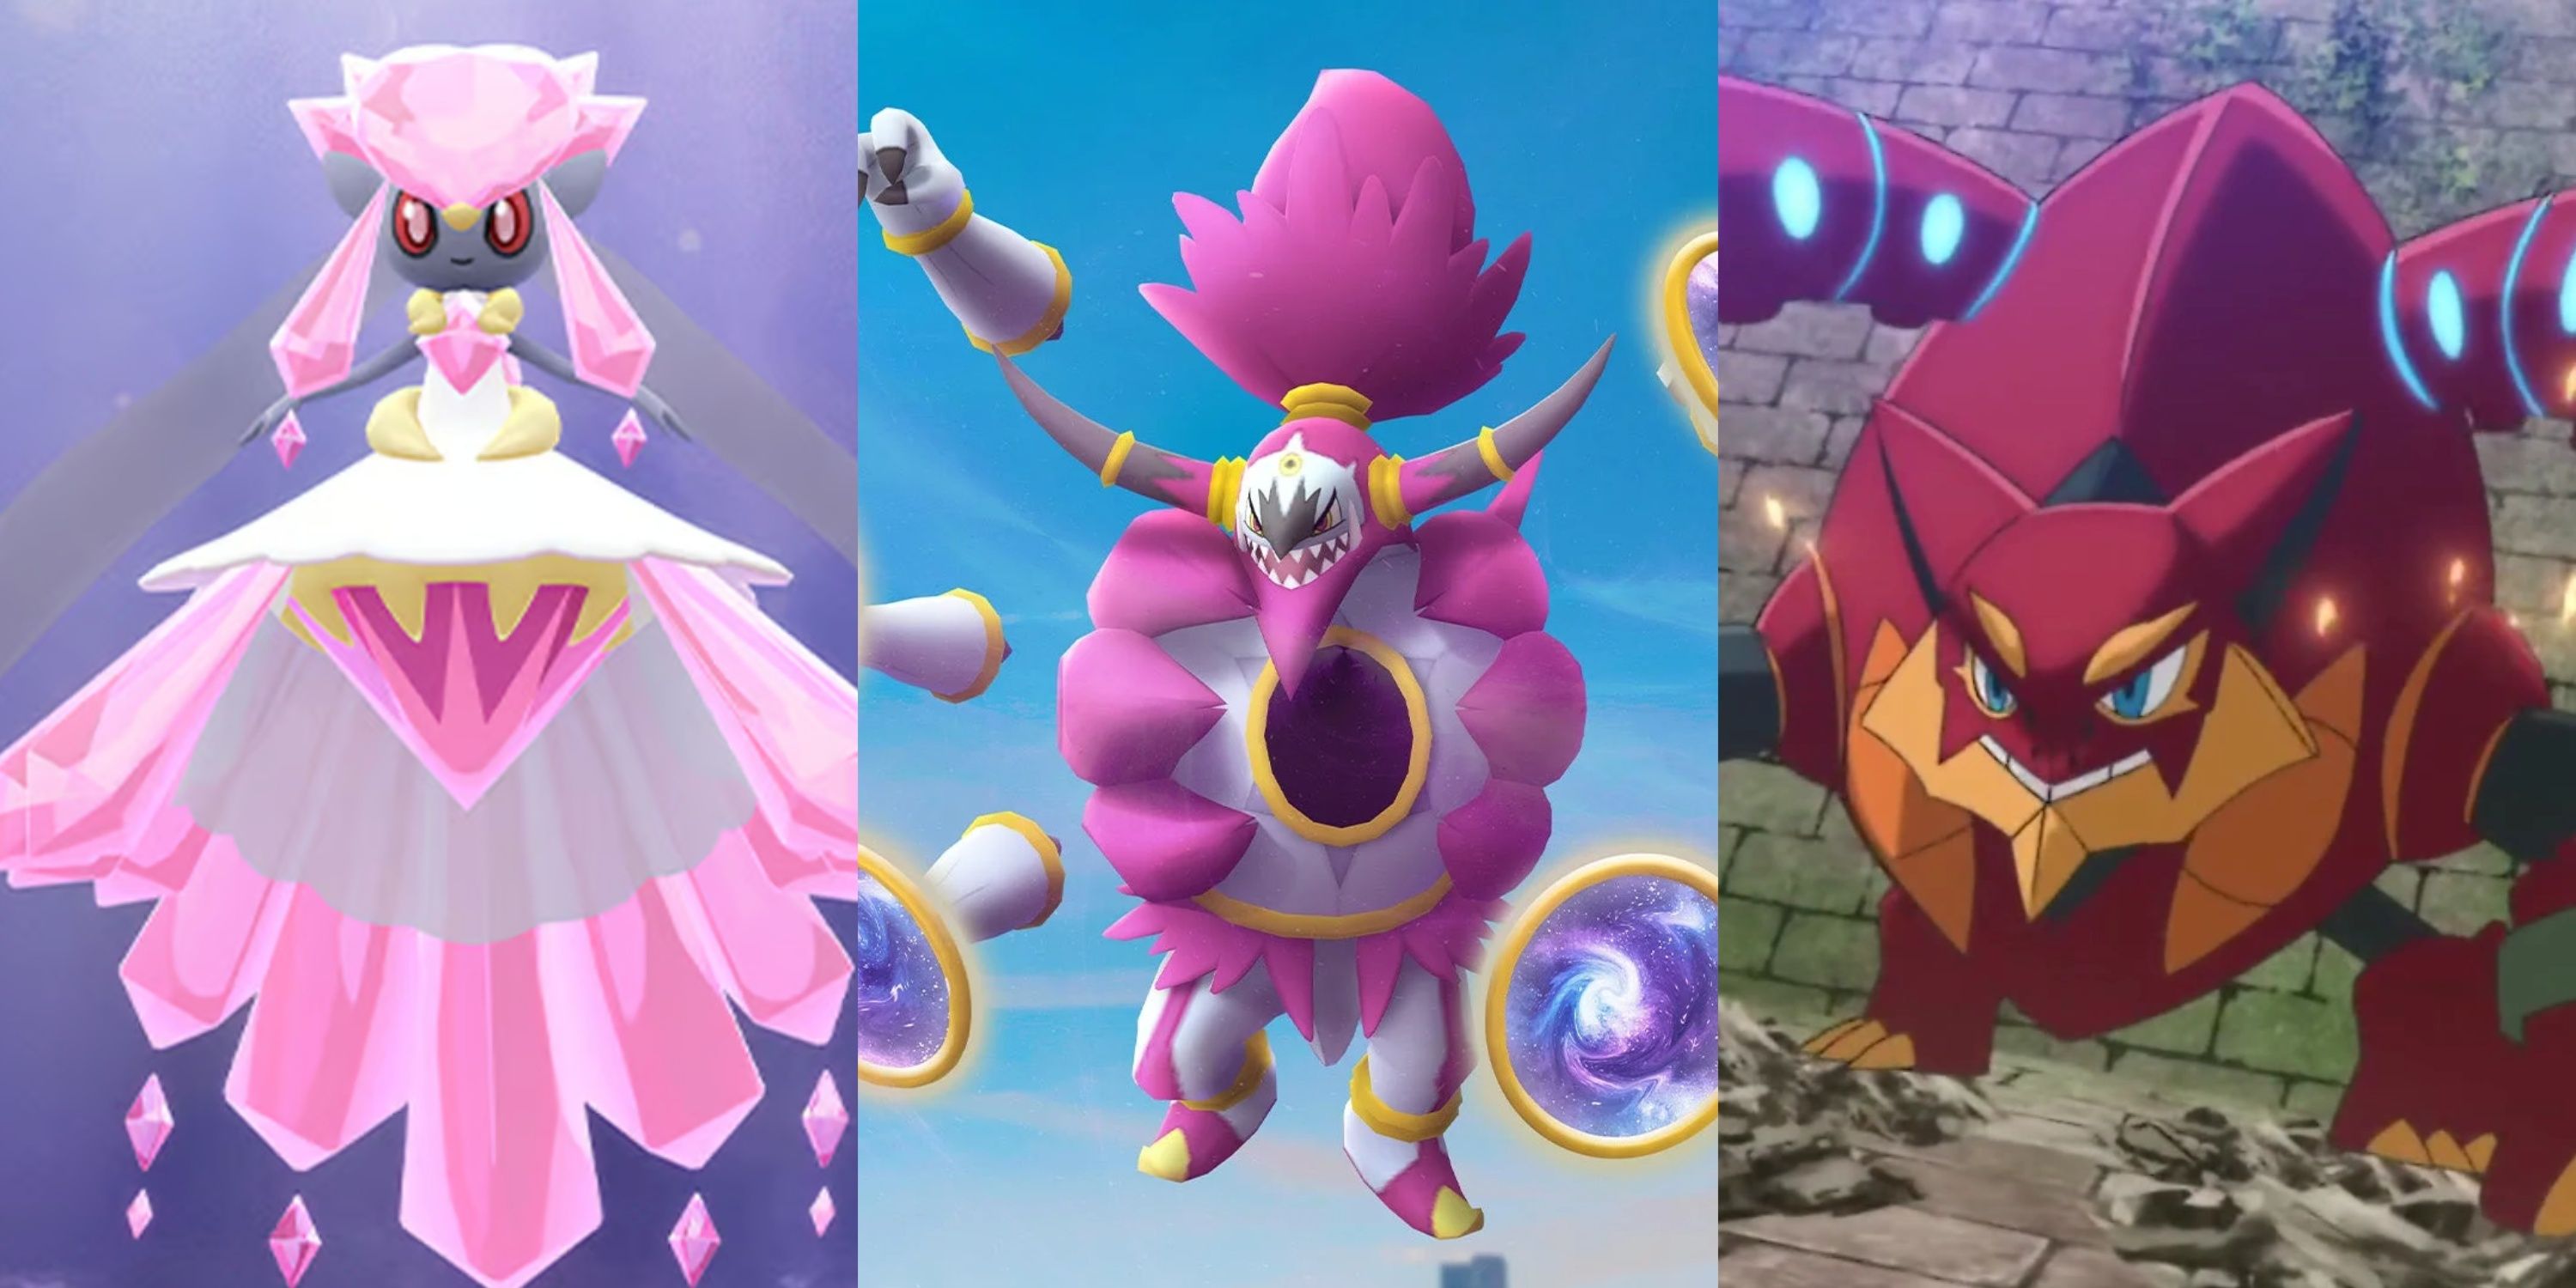 Diancie, Hoopa, and Volcanion